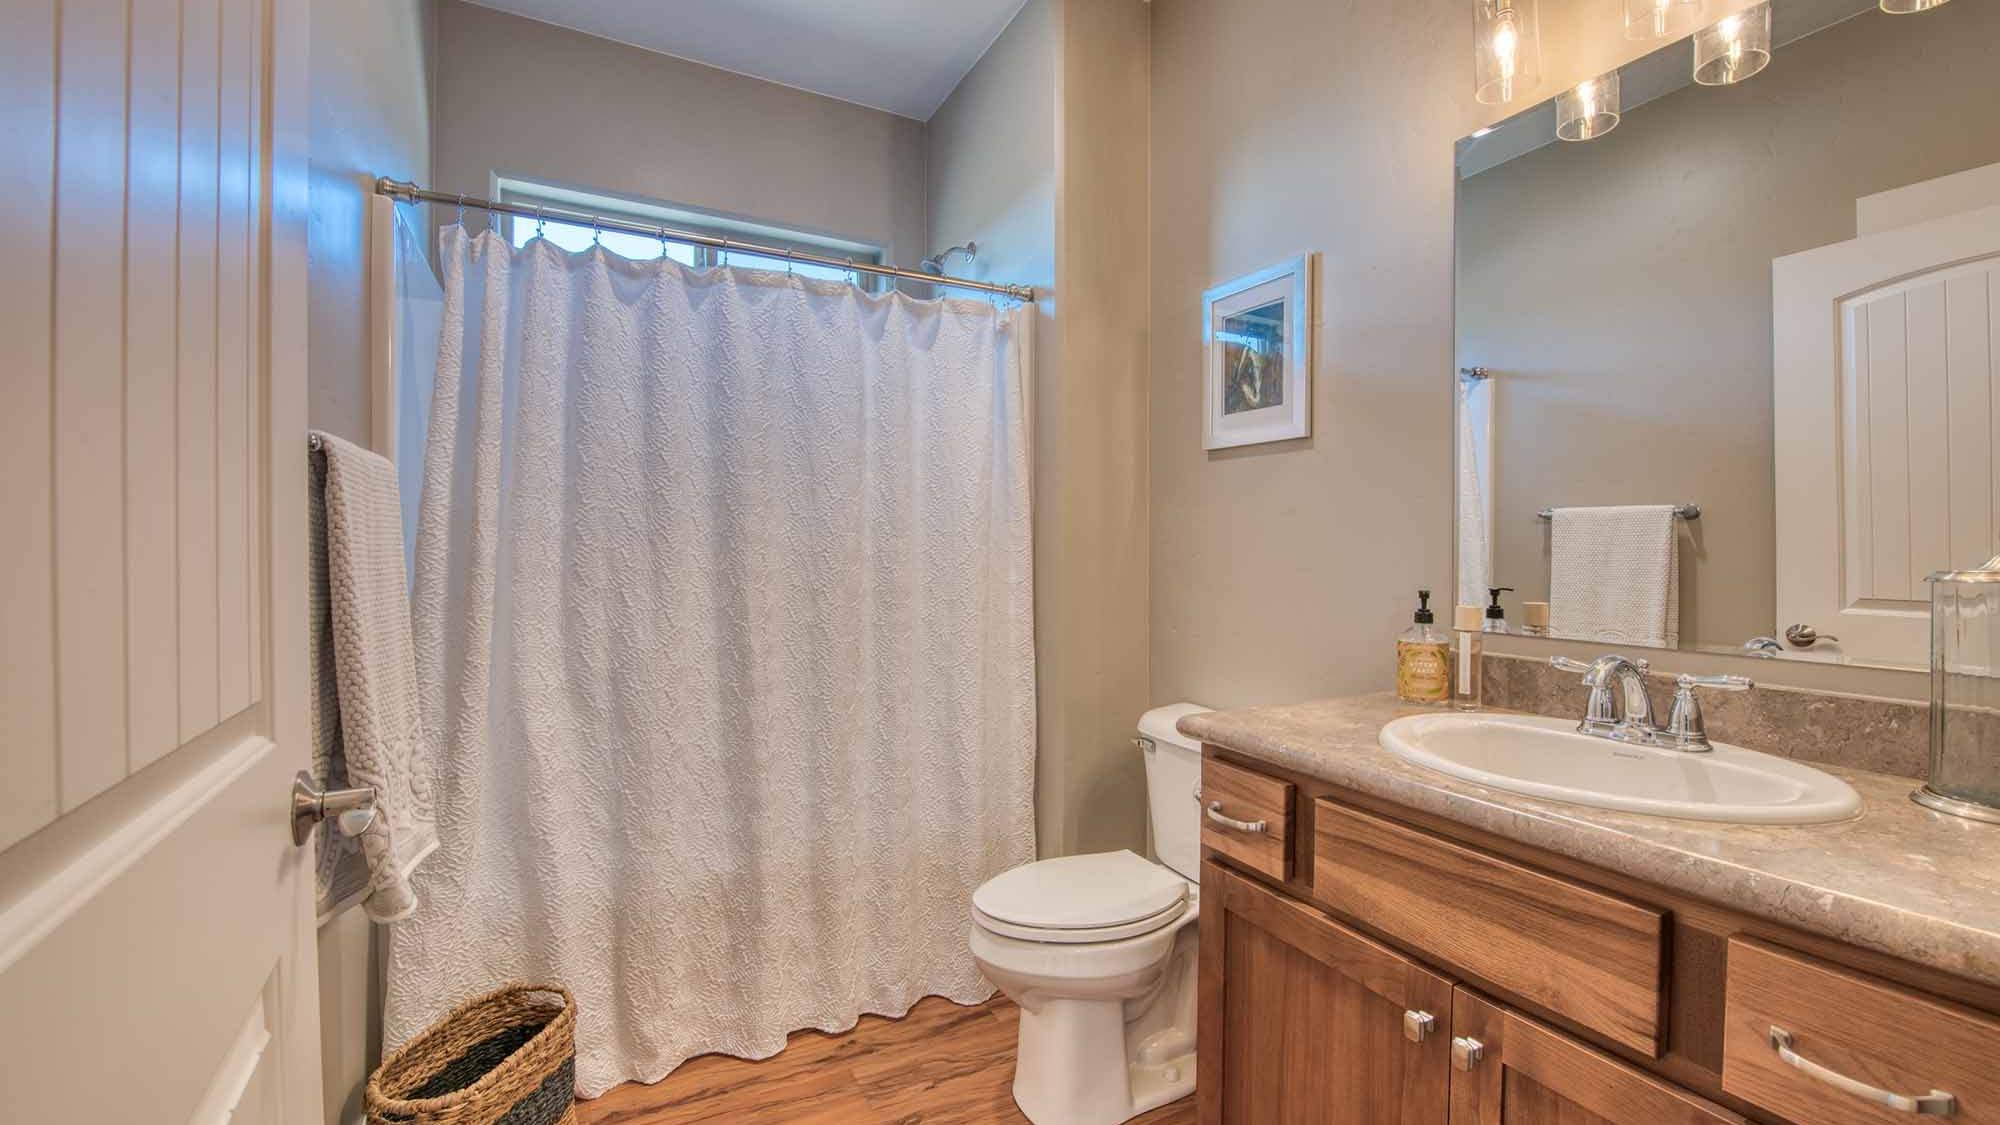 Guest bathroom in The Copper Creek model home - Built by Big Sky Builder in Florence, MT